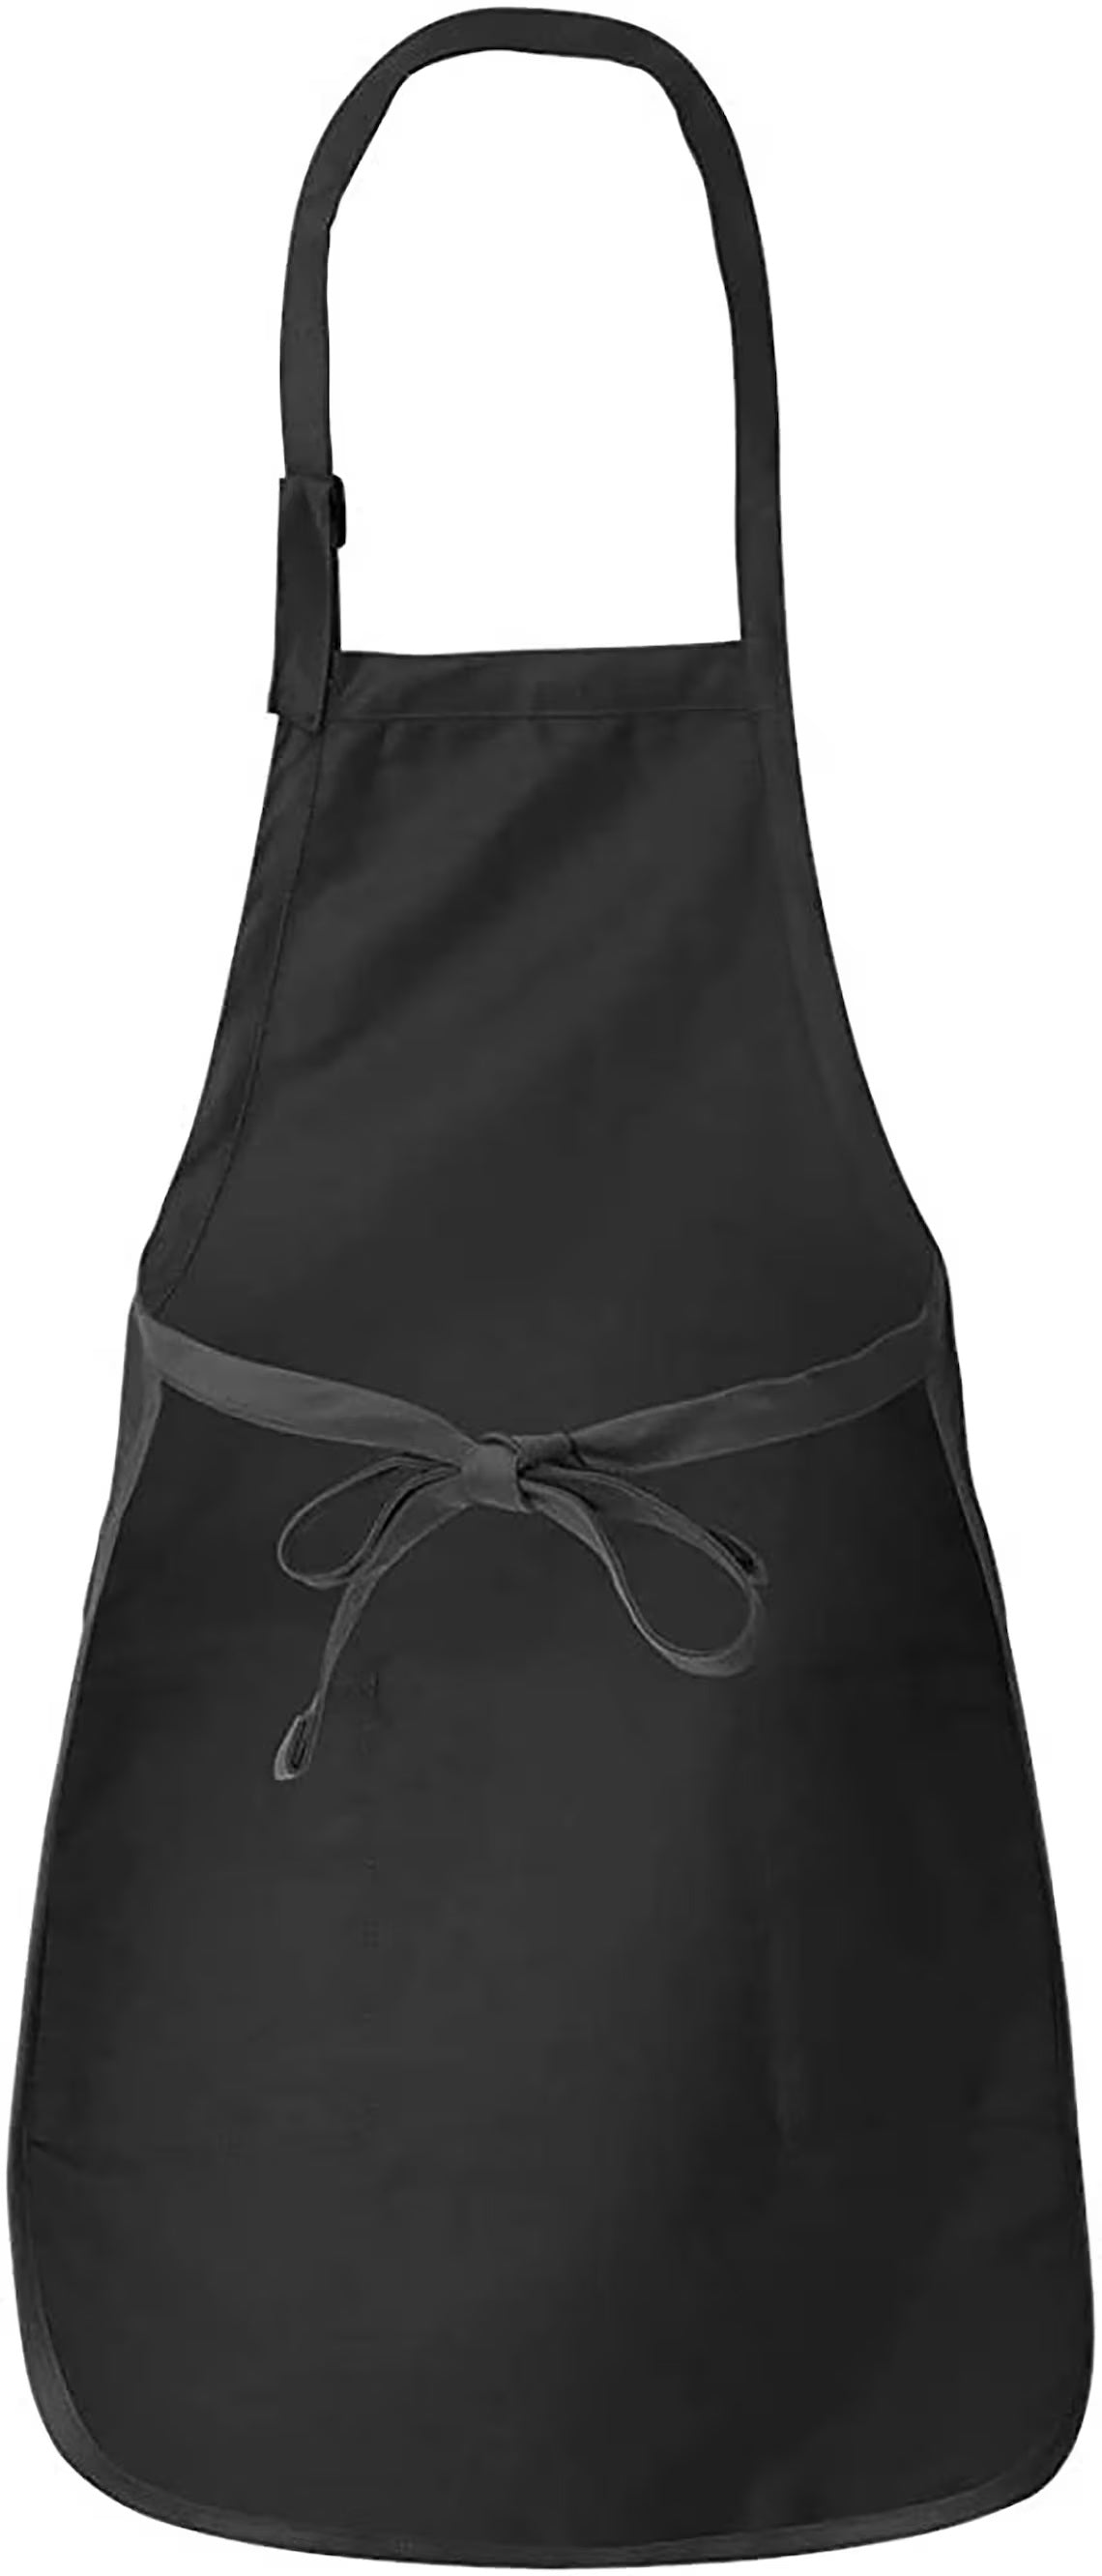 Kitchen Cooking Apron with a Quote for Men, Women